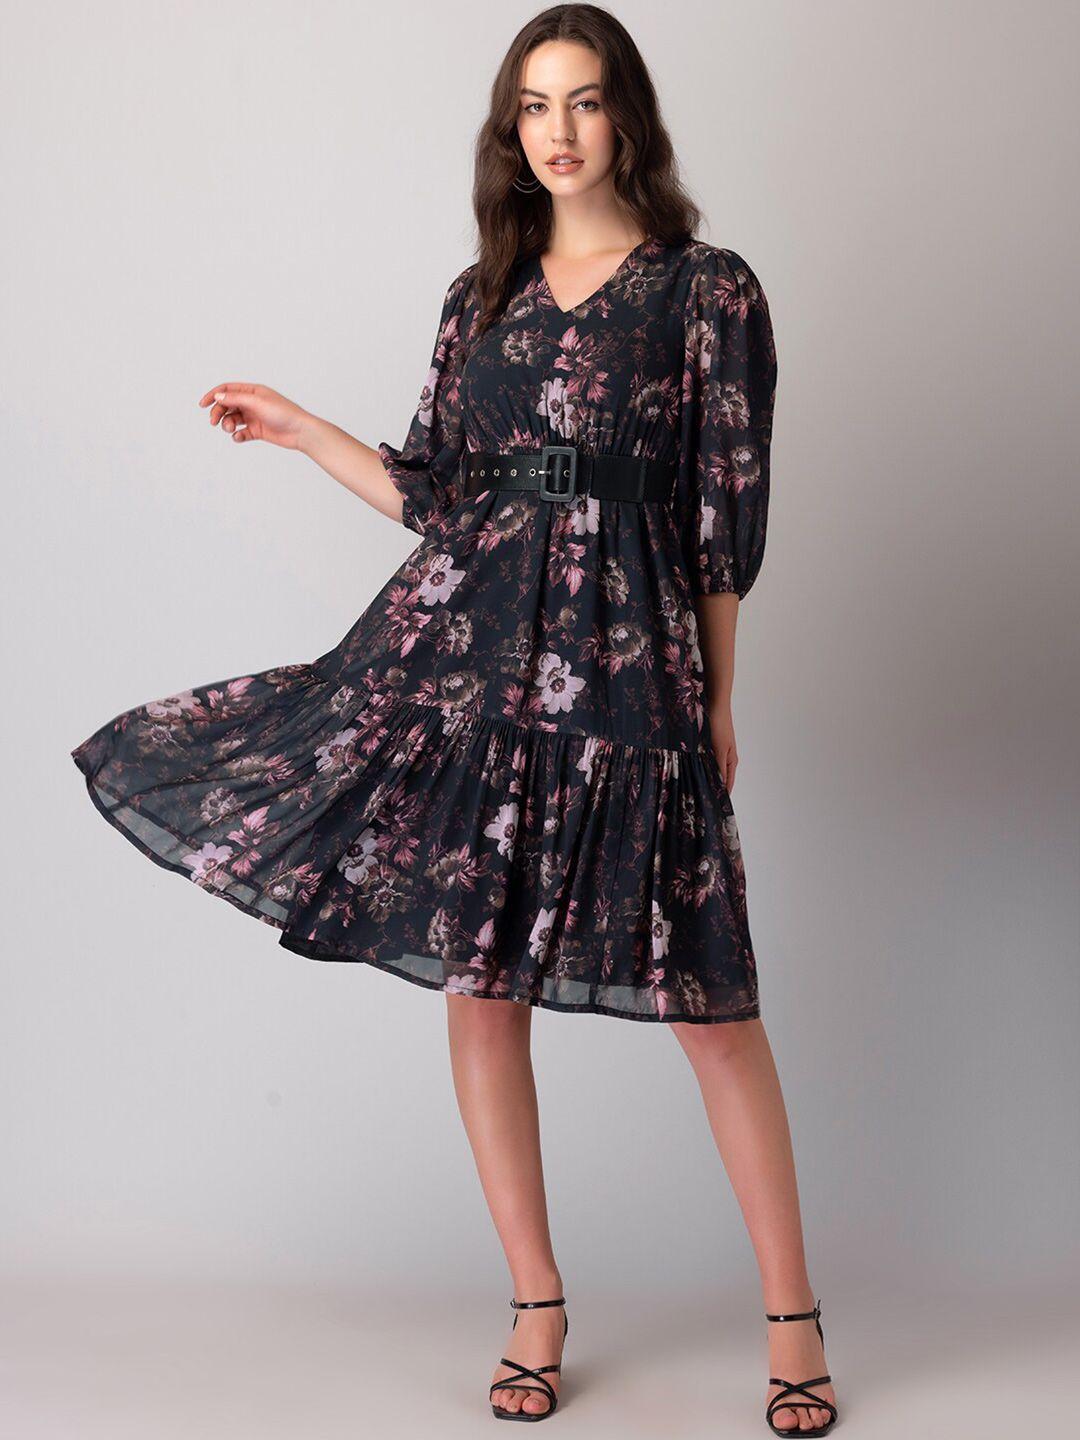 faballey black, white & pink floral printed v-neck puff sleeves fit & flare dress